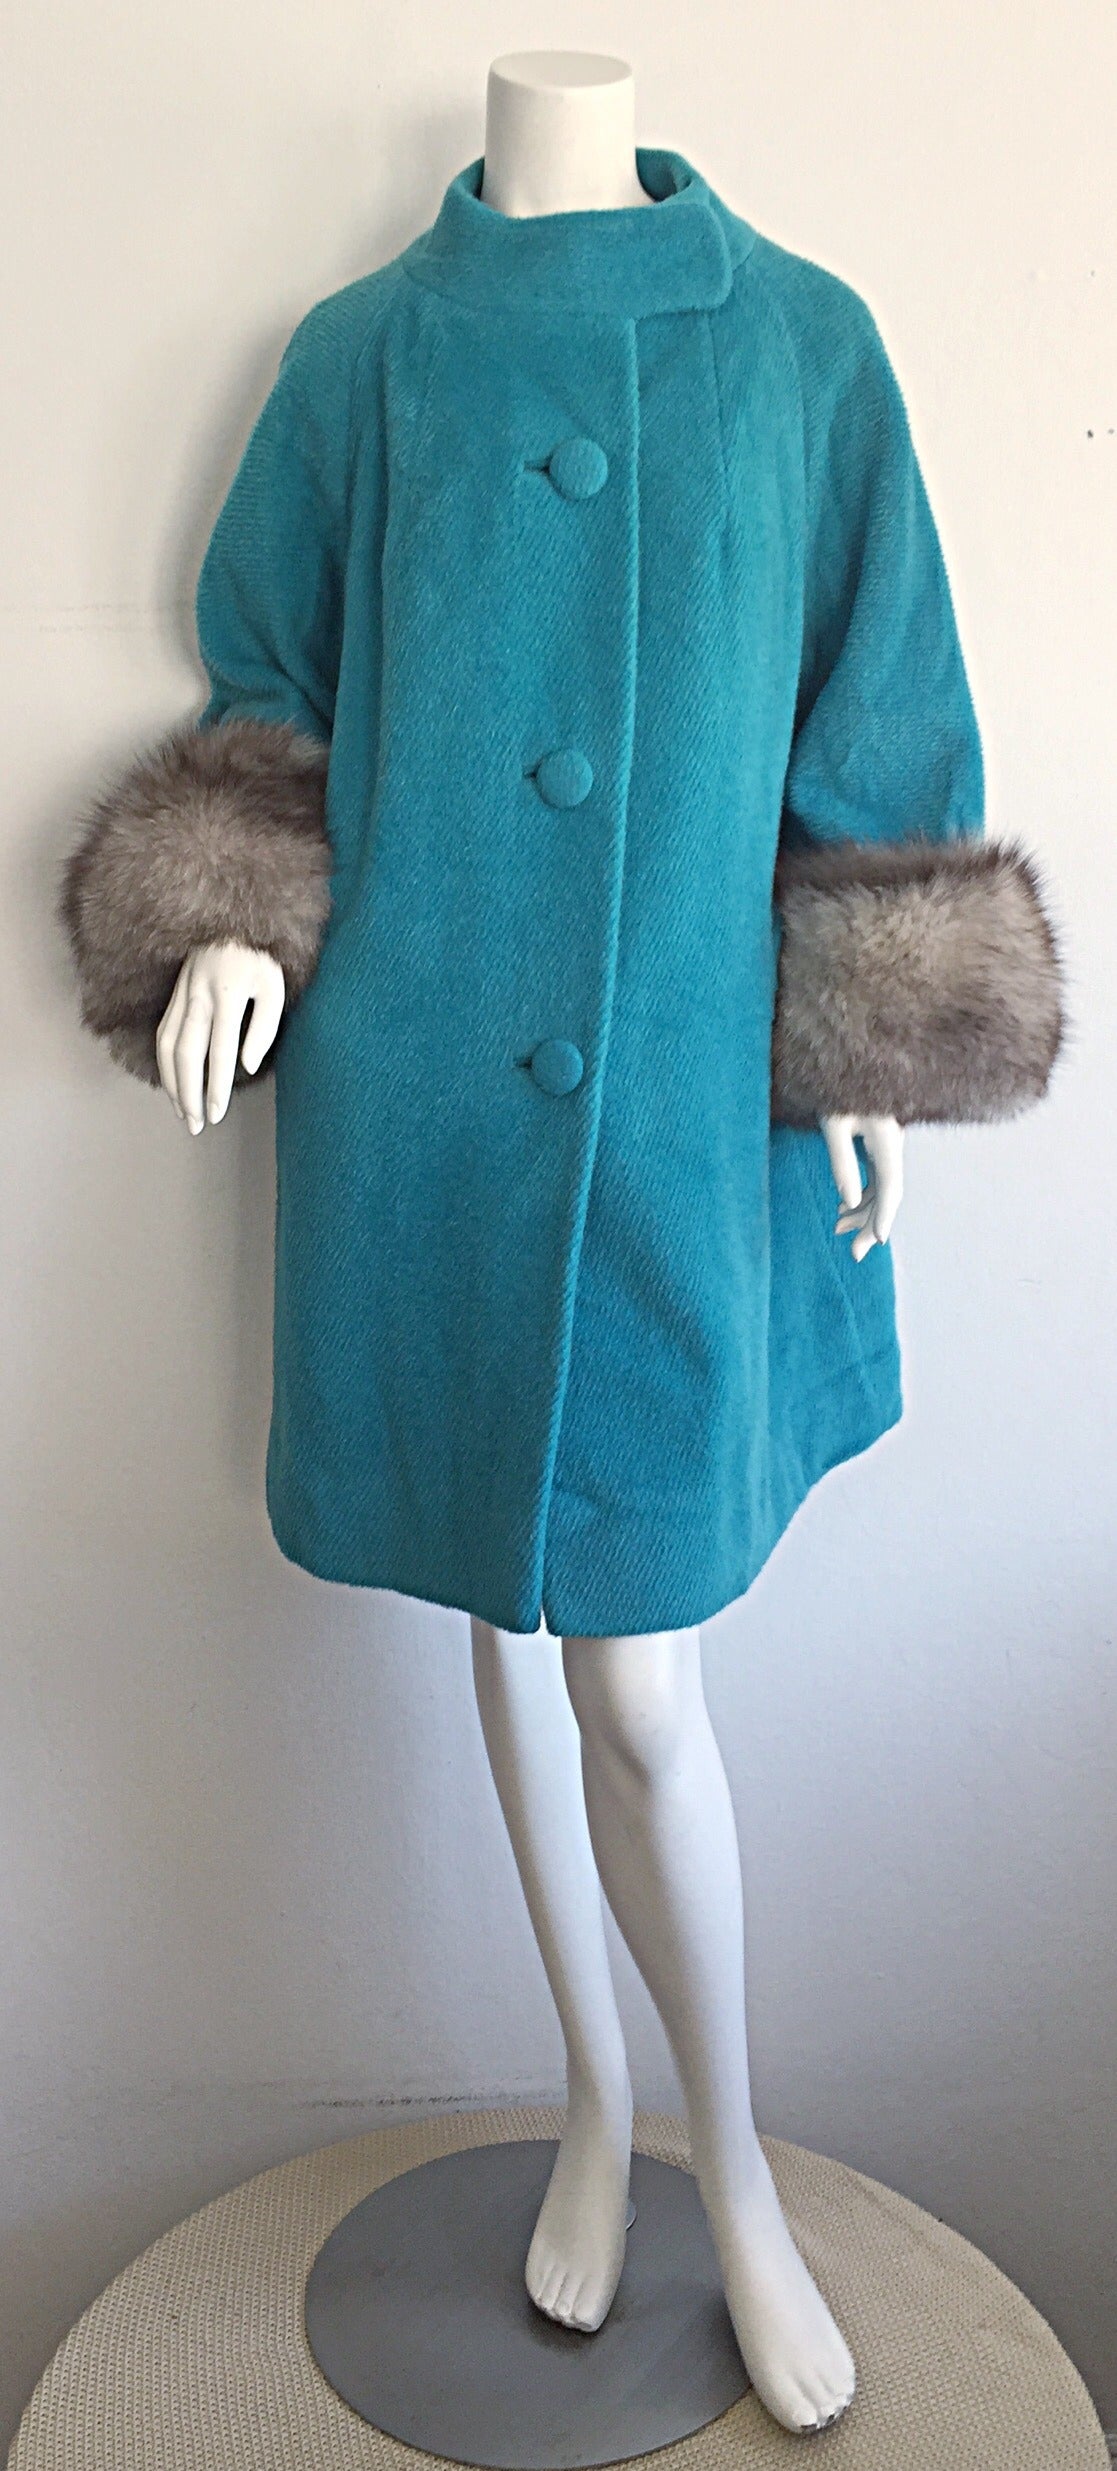 Incredible 1960s Lilli Ann of San Francisco, by Tisse a Paris couture swing coat! Vibrant blue color, with gray fox fur at cuffs. Incredible timeless style, that is extremely versatile! Goes with every color, and every outfit! The PERFECT jacket!